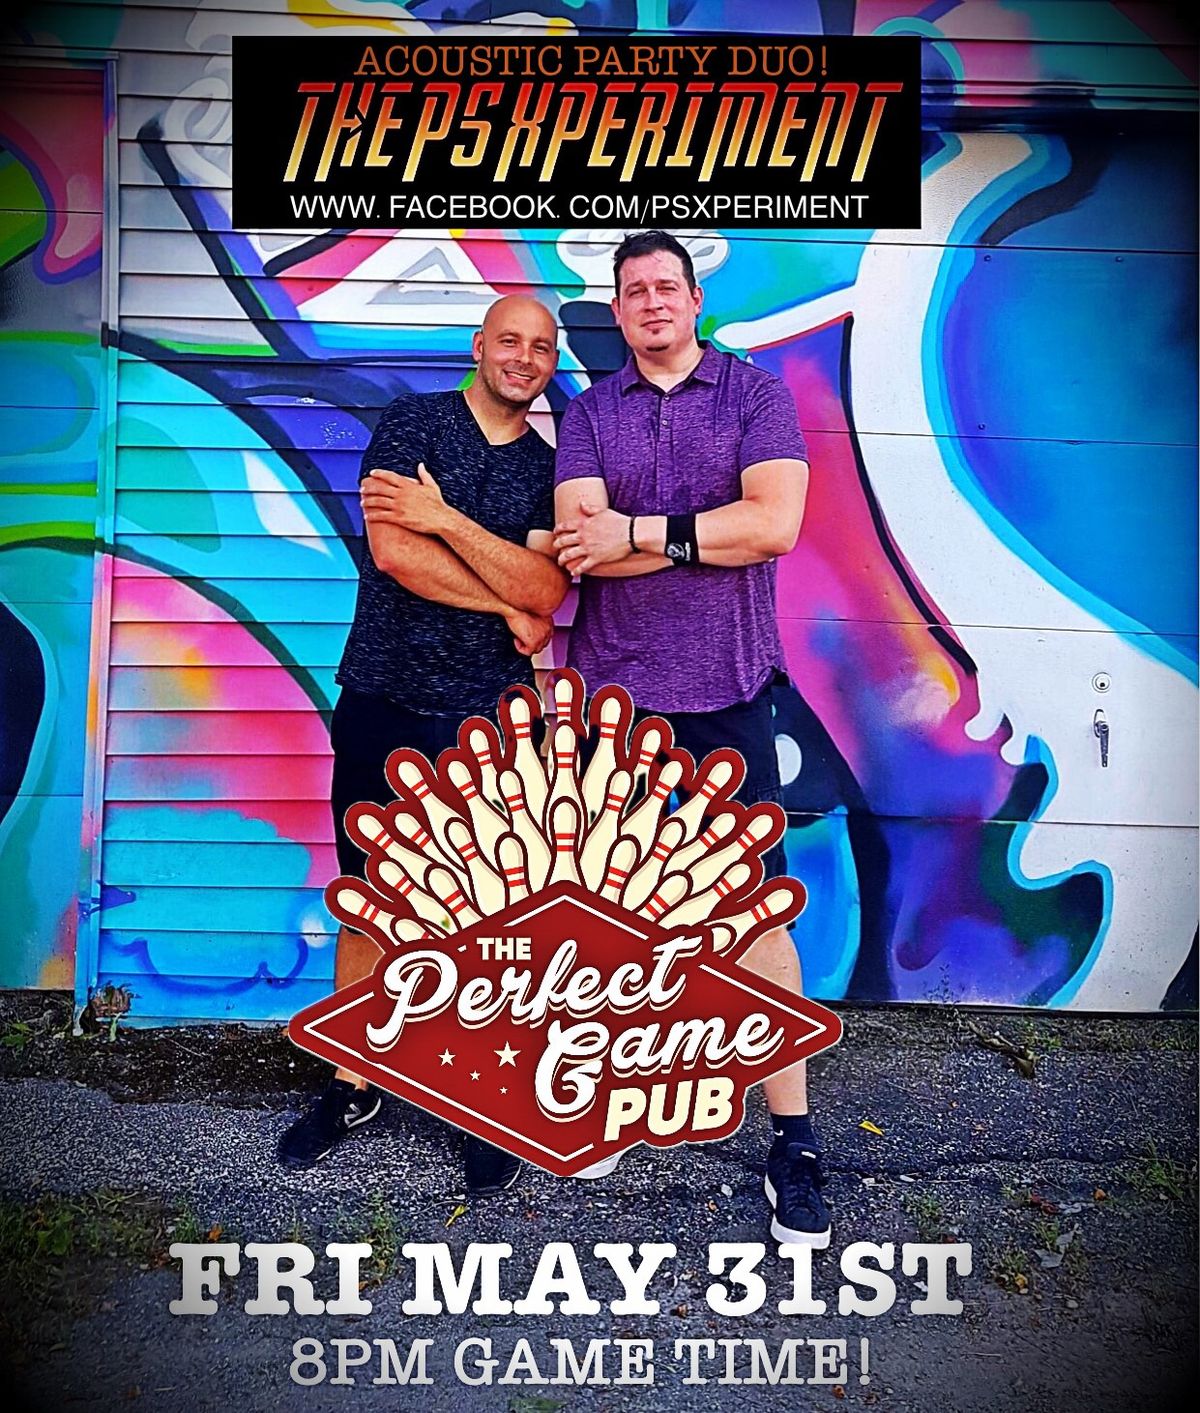 The PS Xperiment Live @ The Perfect Game Pub! 